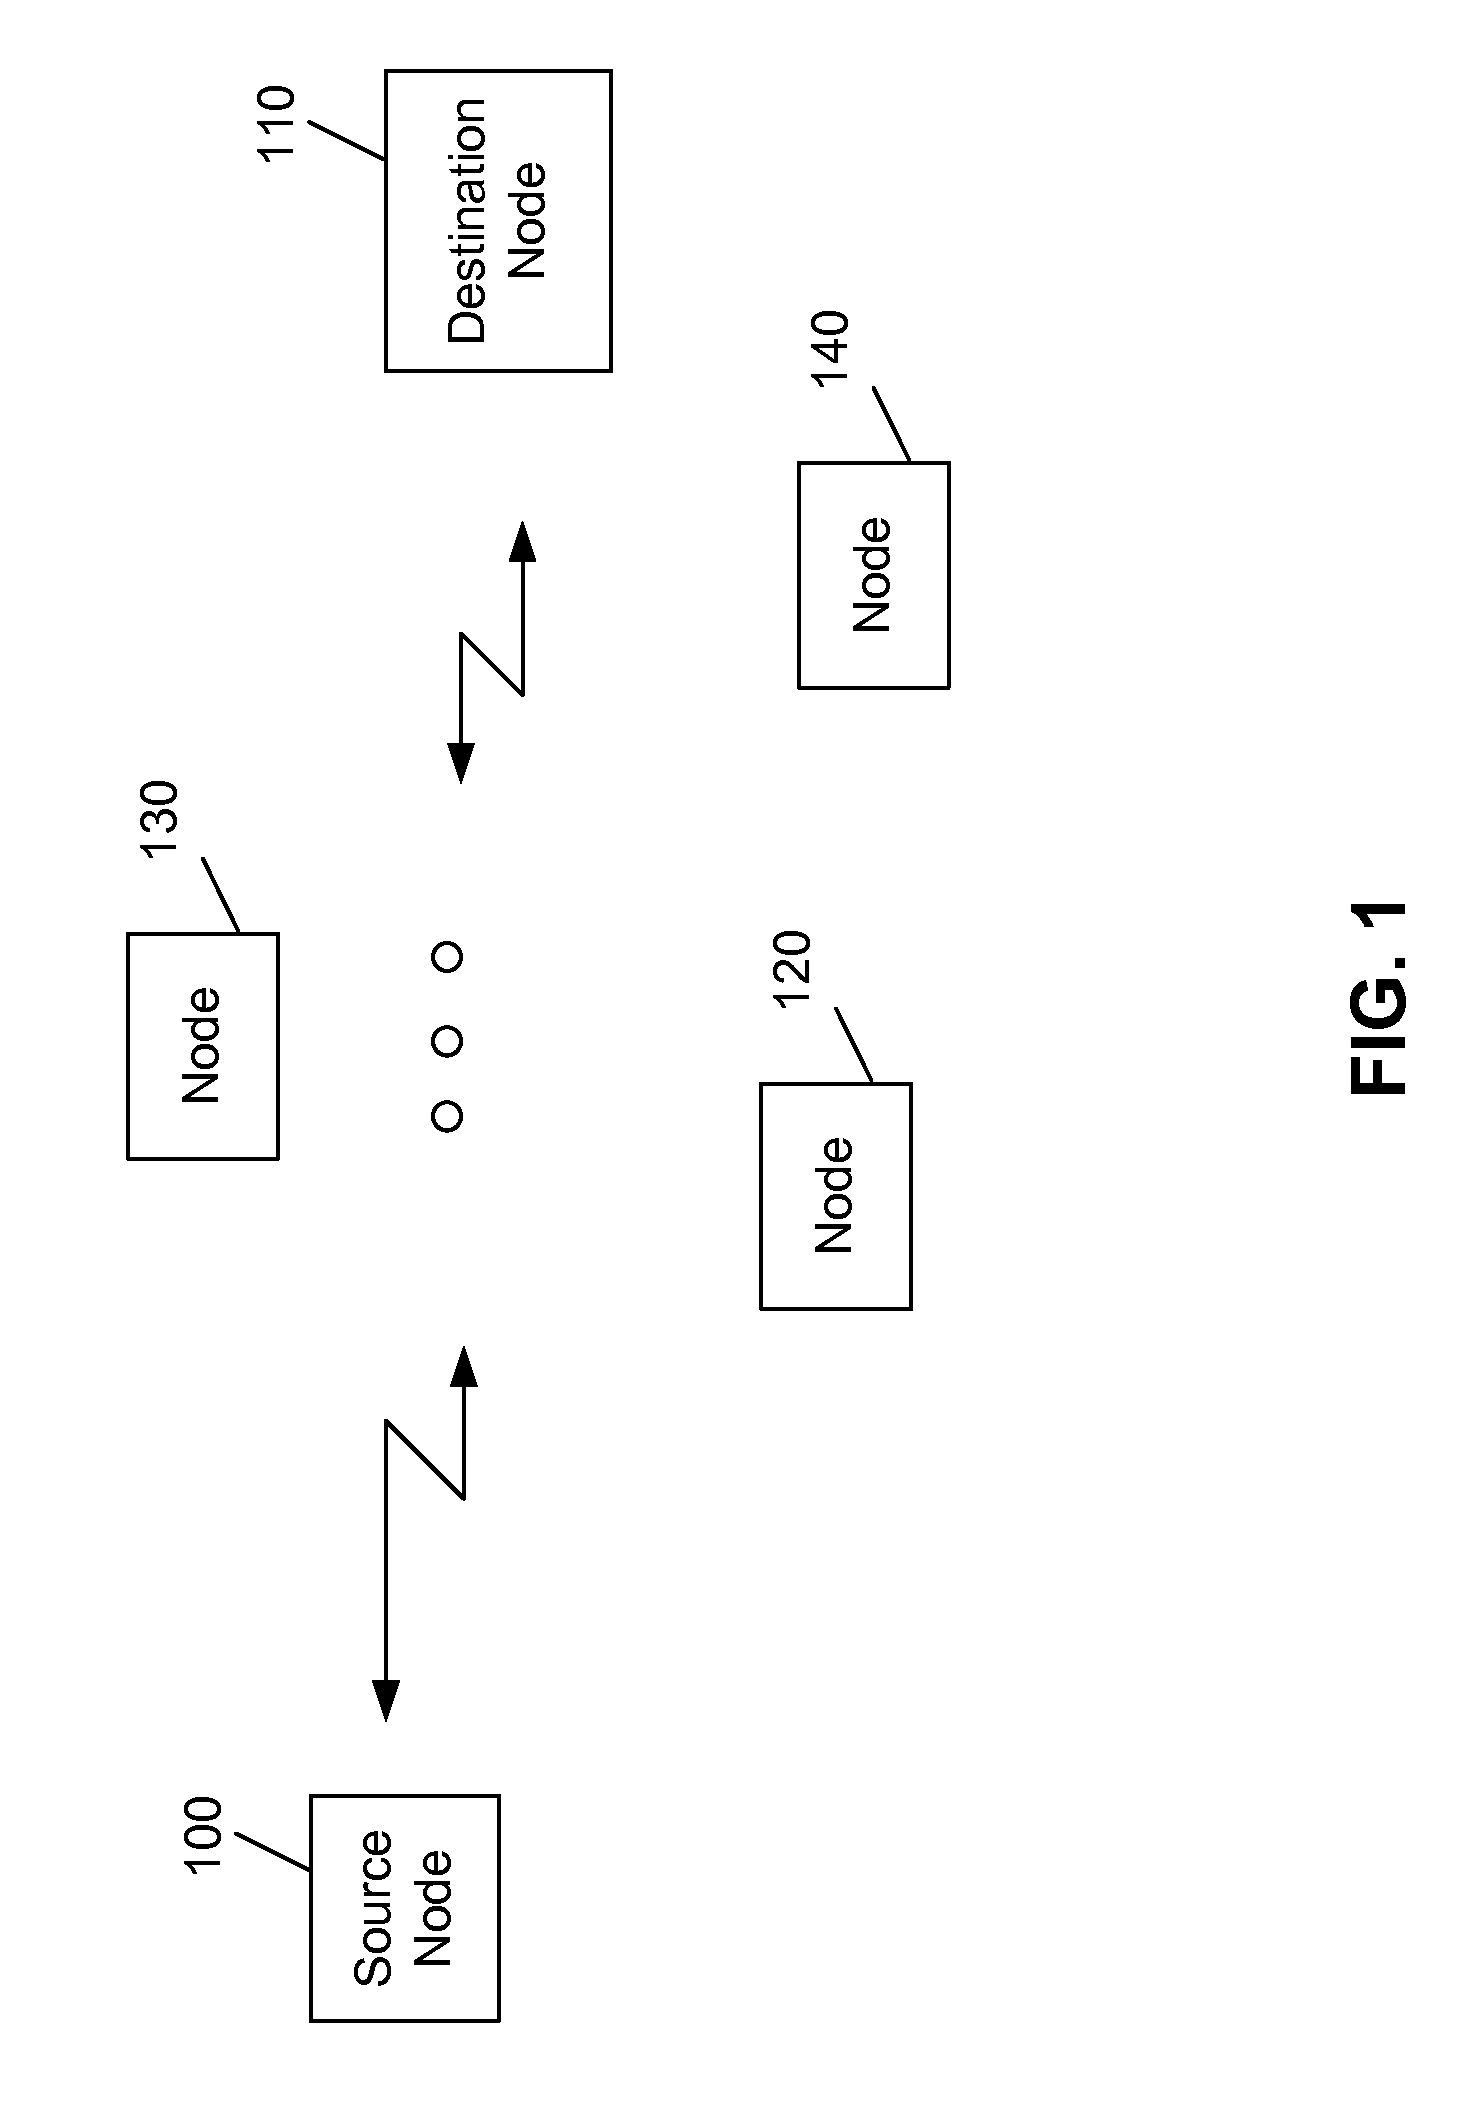 Apparatus and method for transmission and recovery modes for an rts/cts system that utilizes multichannels